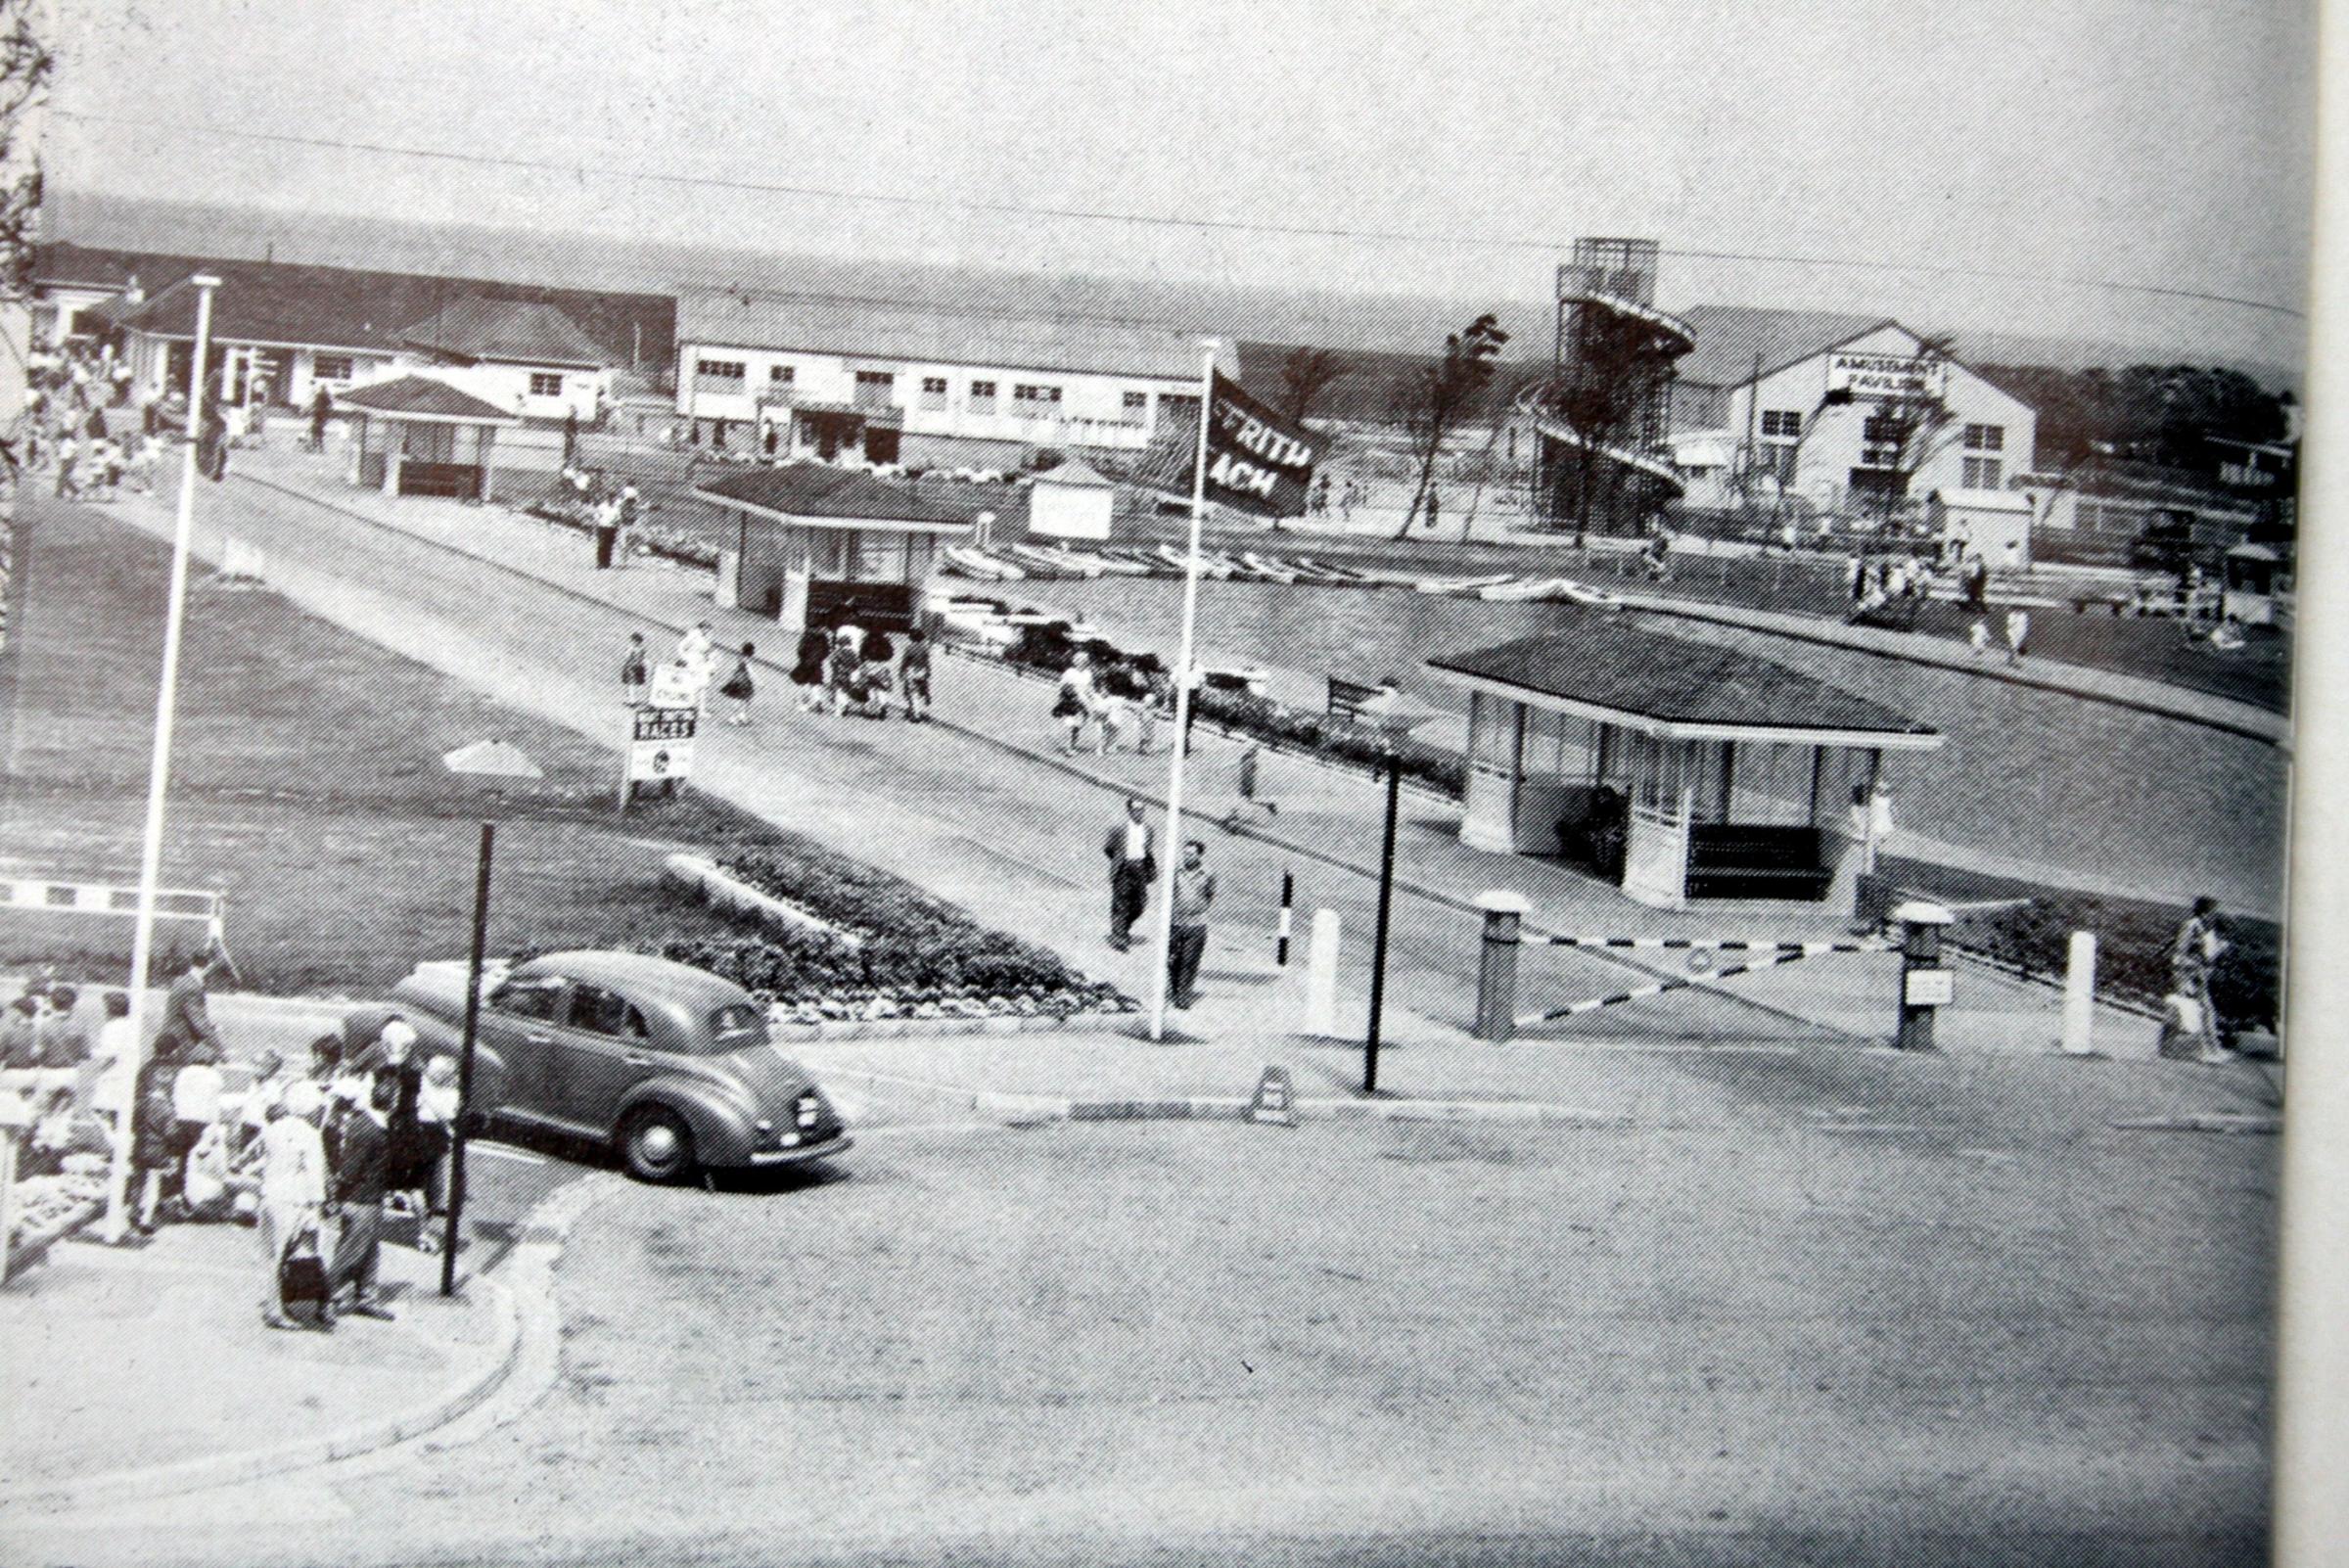 Prestatyn in 1966. Photo courtesy of the Elvet Pierce collection